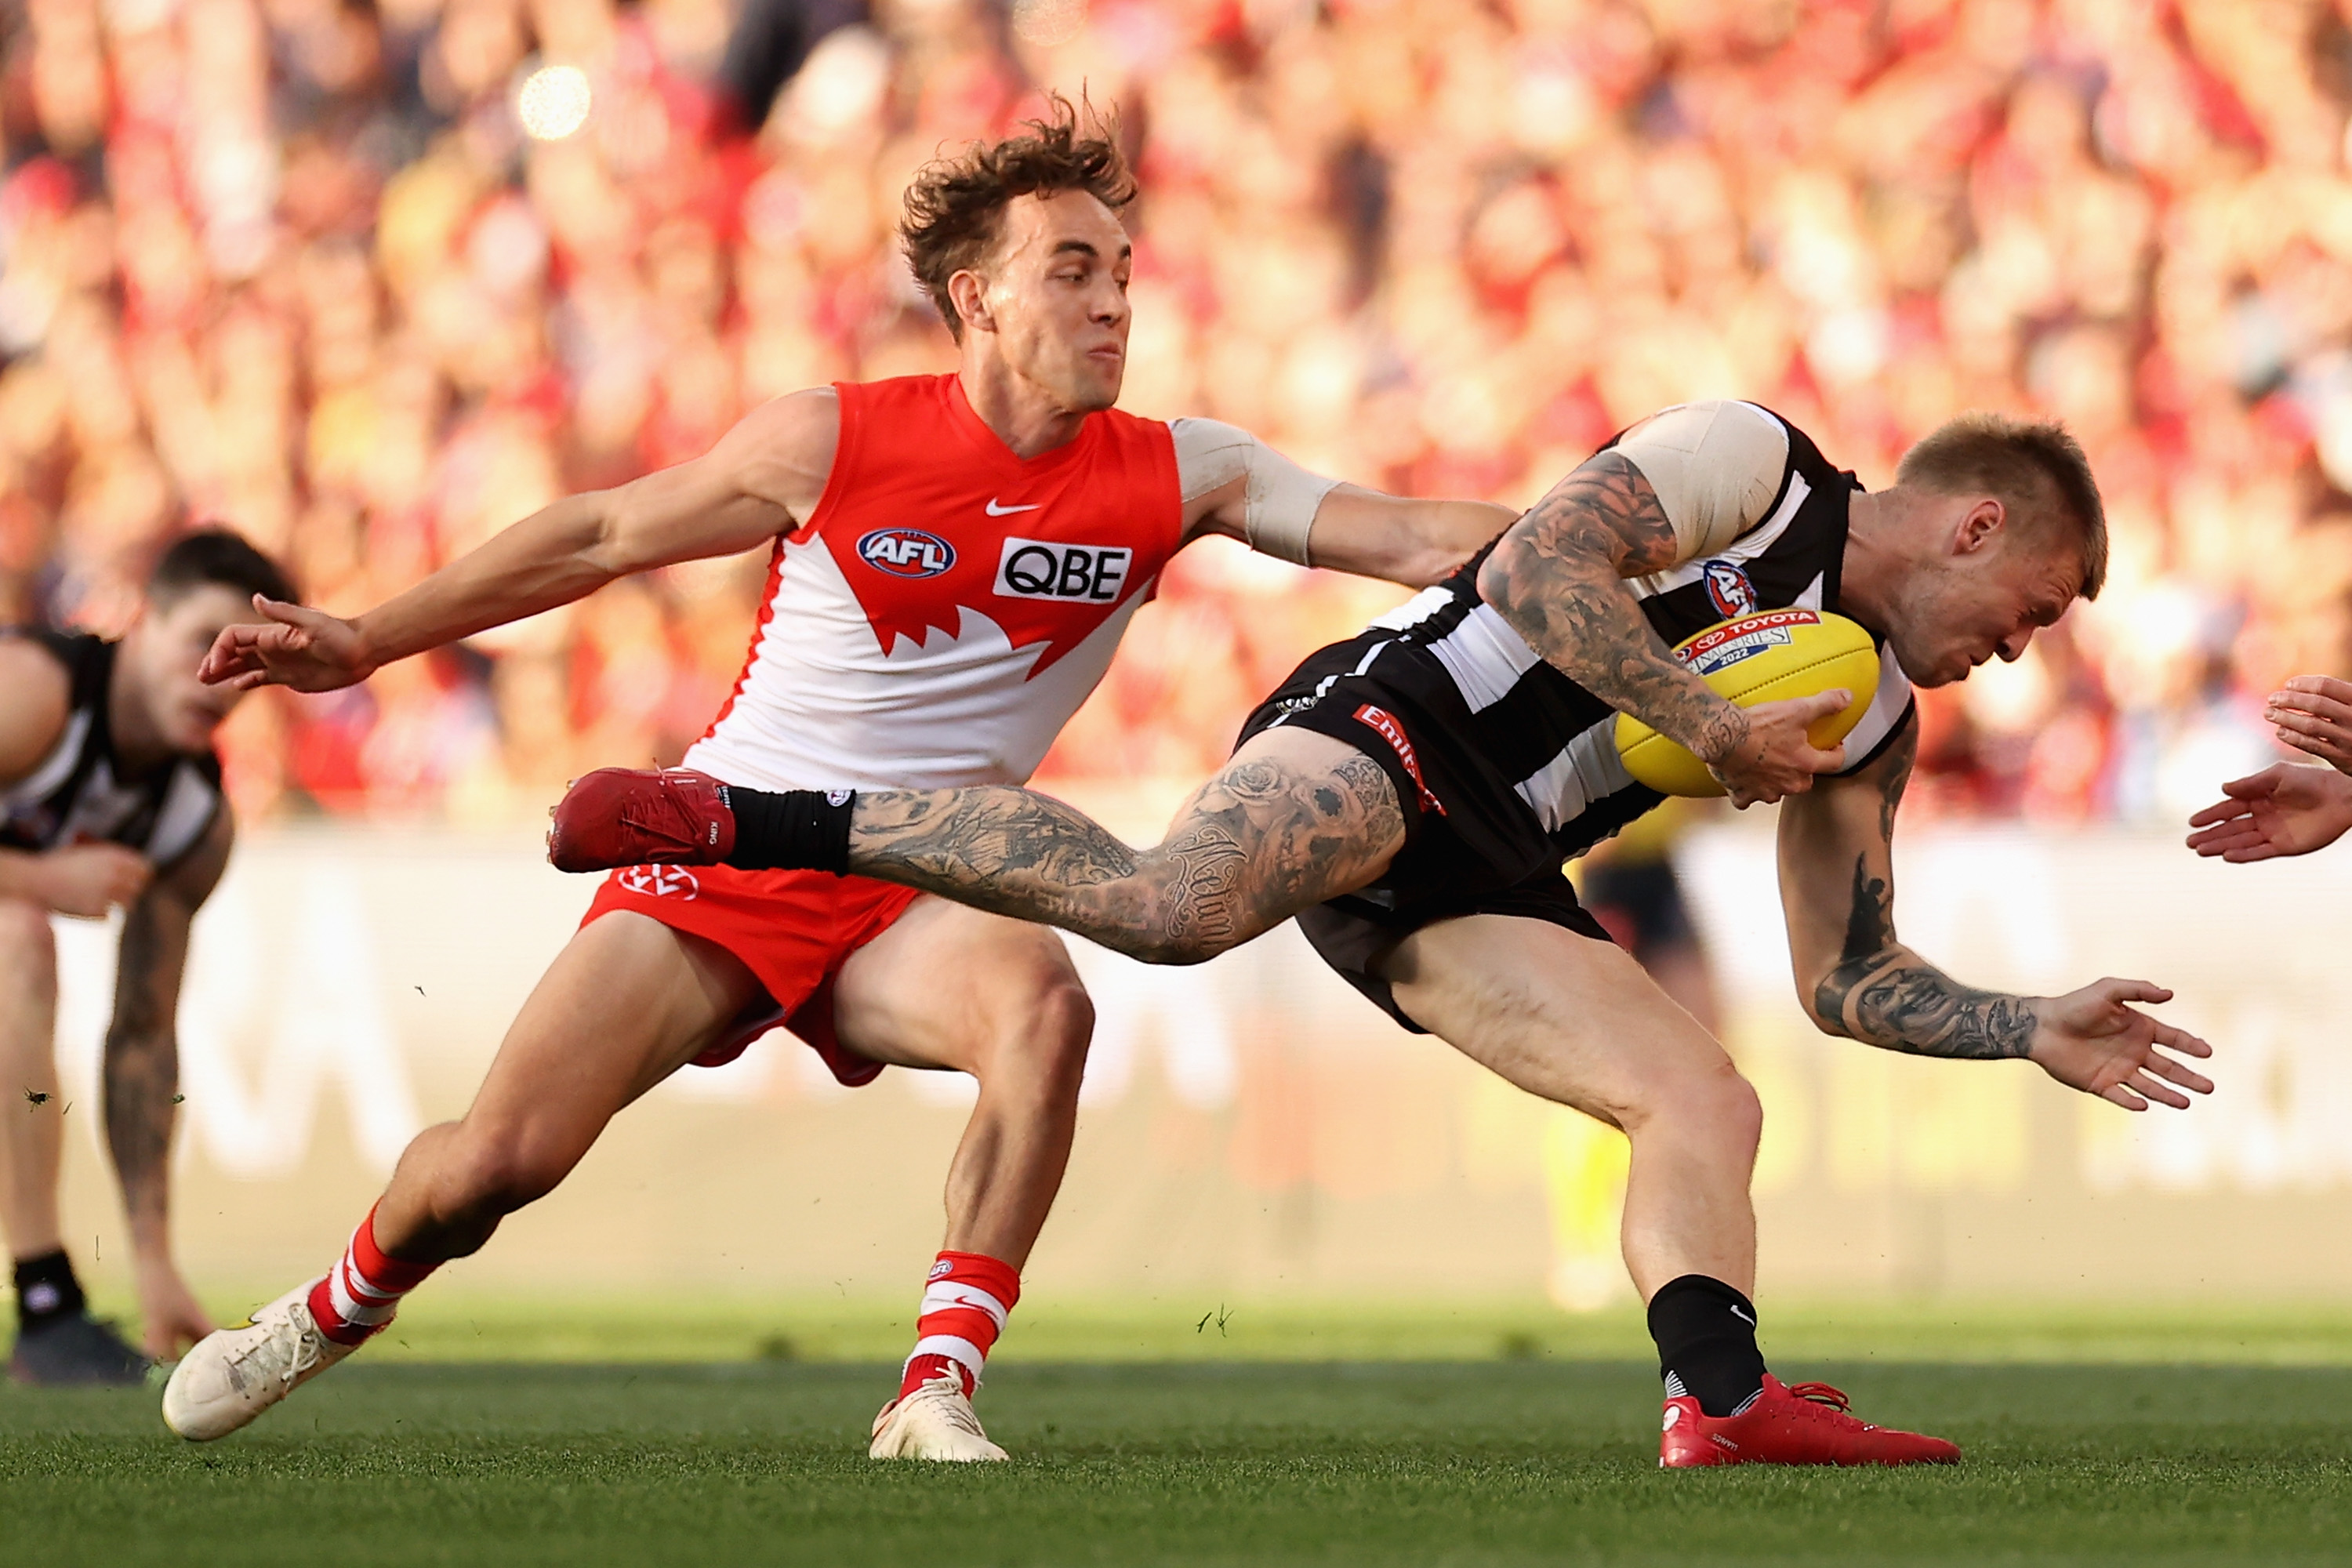 Jordan De Goey of the Magpies is tackled during the AFL Second Preliminary match between the Sydney Swans and the Collingwood Magpies at Sydney Cricket Ground on September 17, 2022 in Sydney, Australia. (Photo by Cameron Spencer/Getty Images)